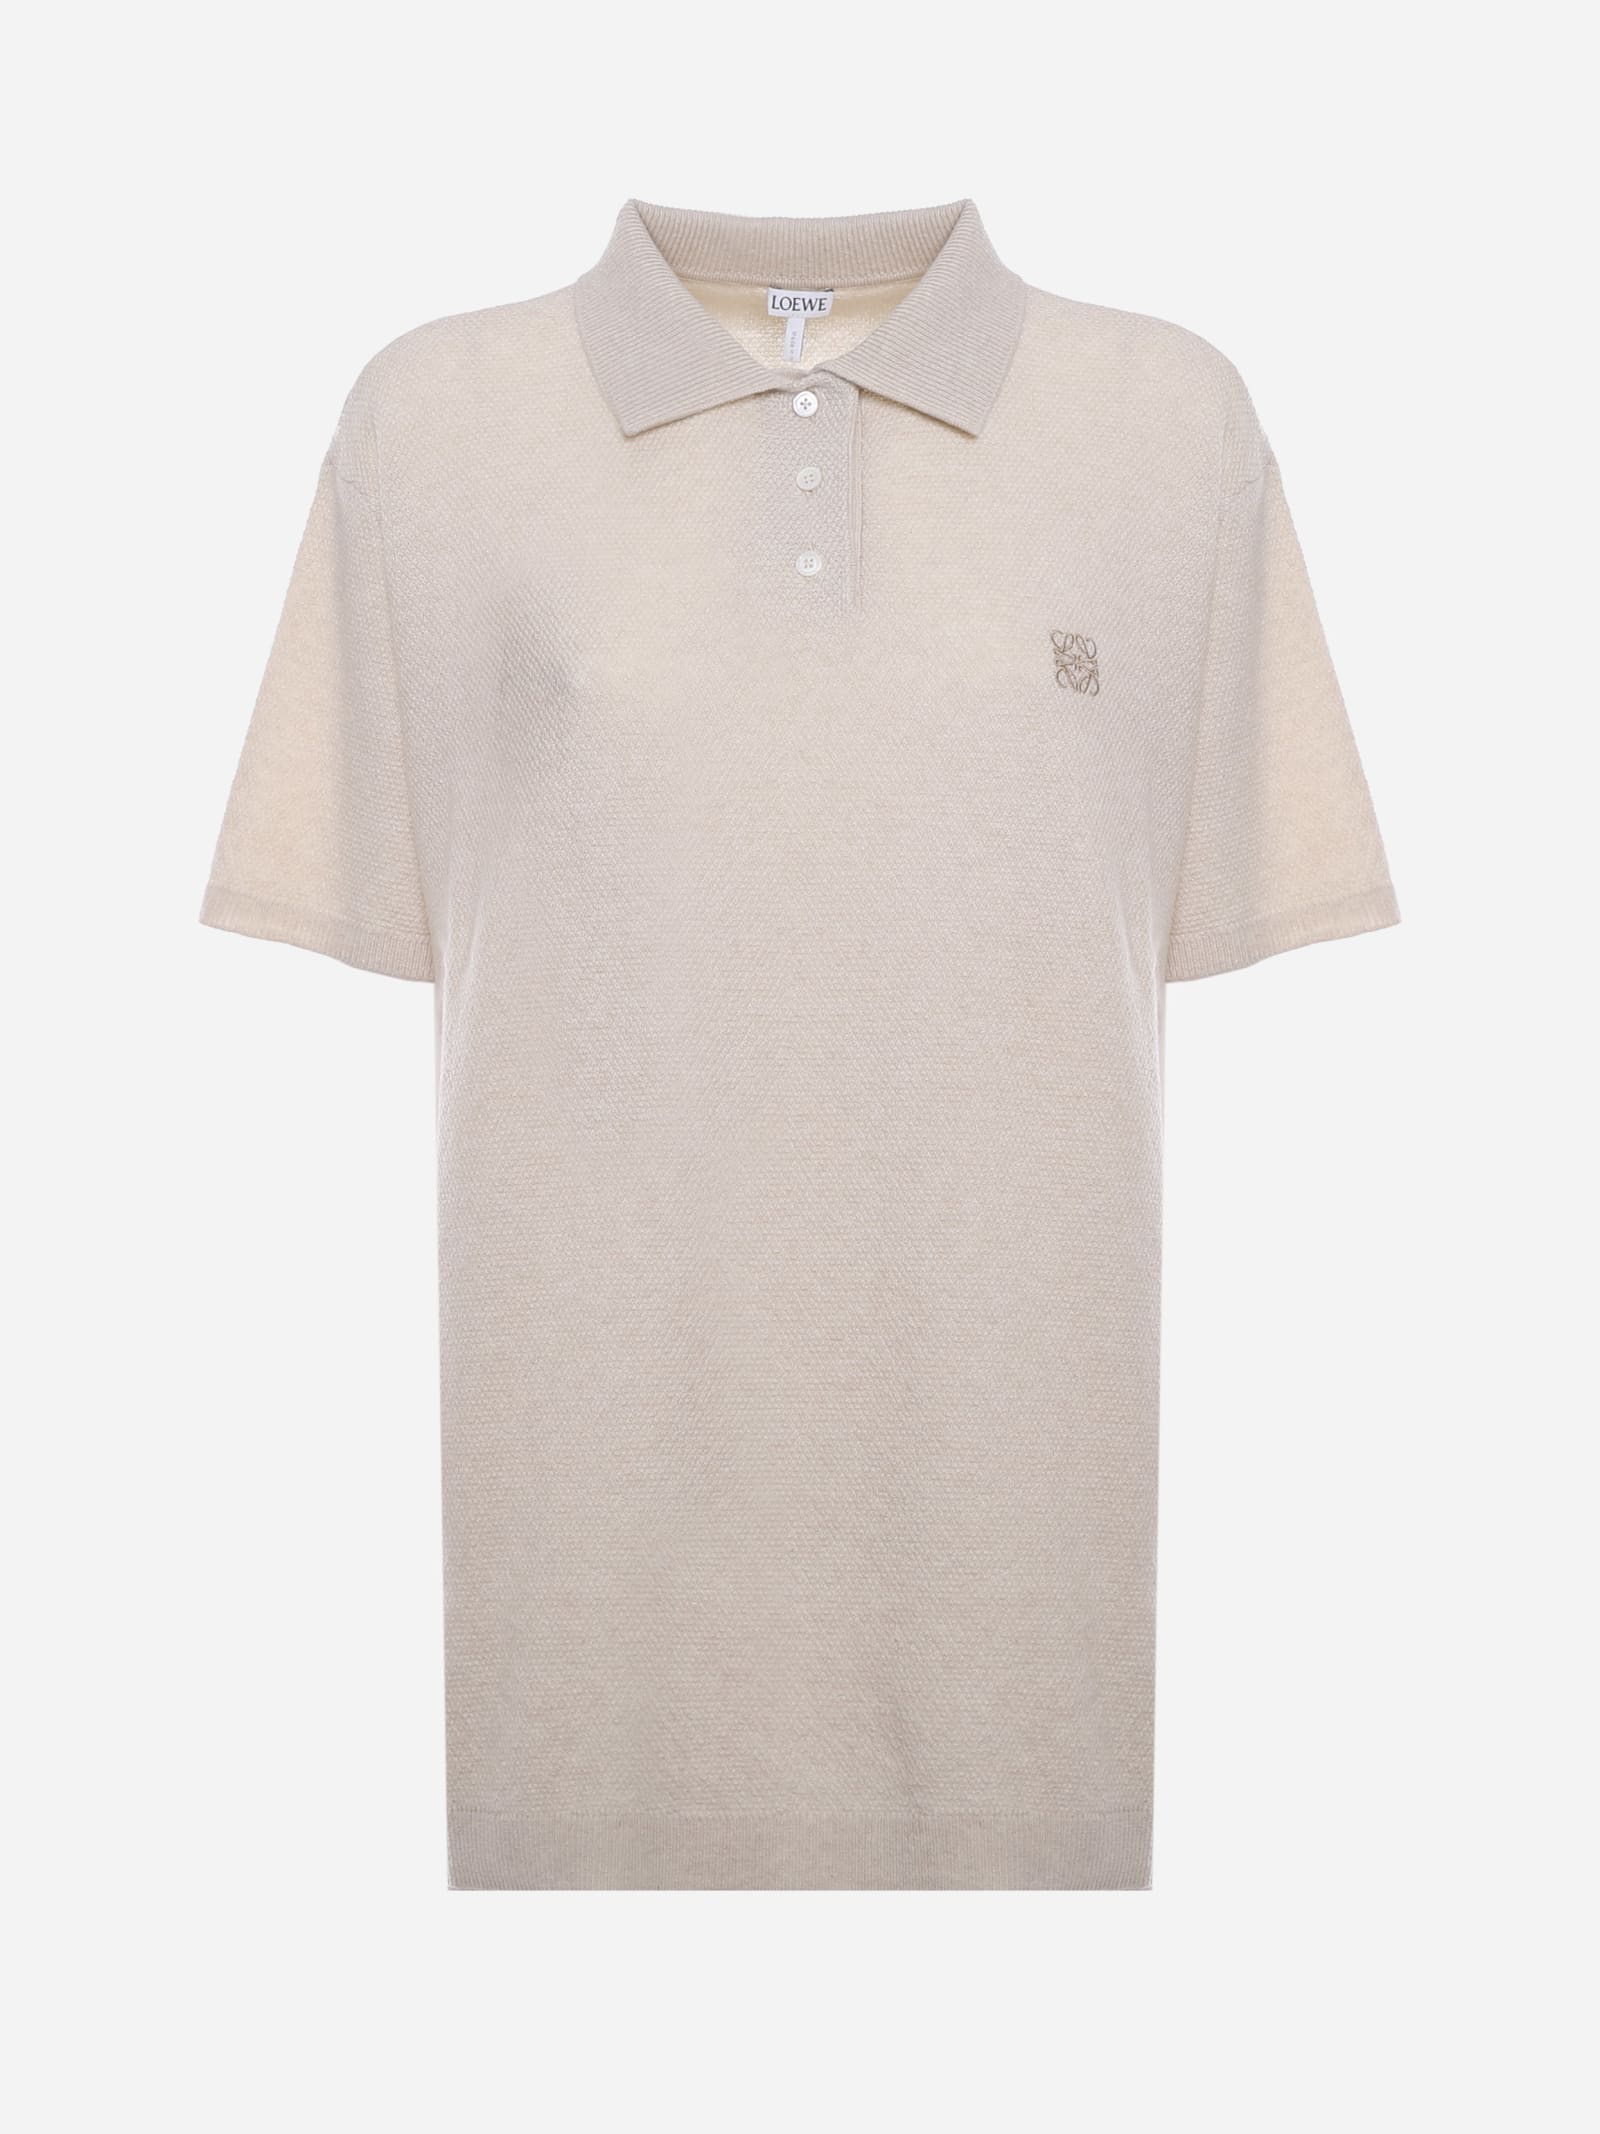 Loewe Cashmere Polo Shirt With Embroidered Anagram